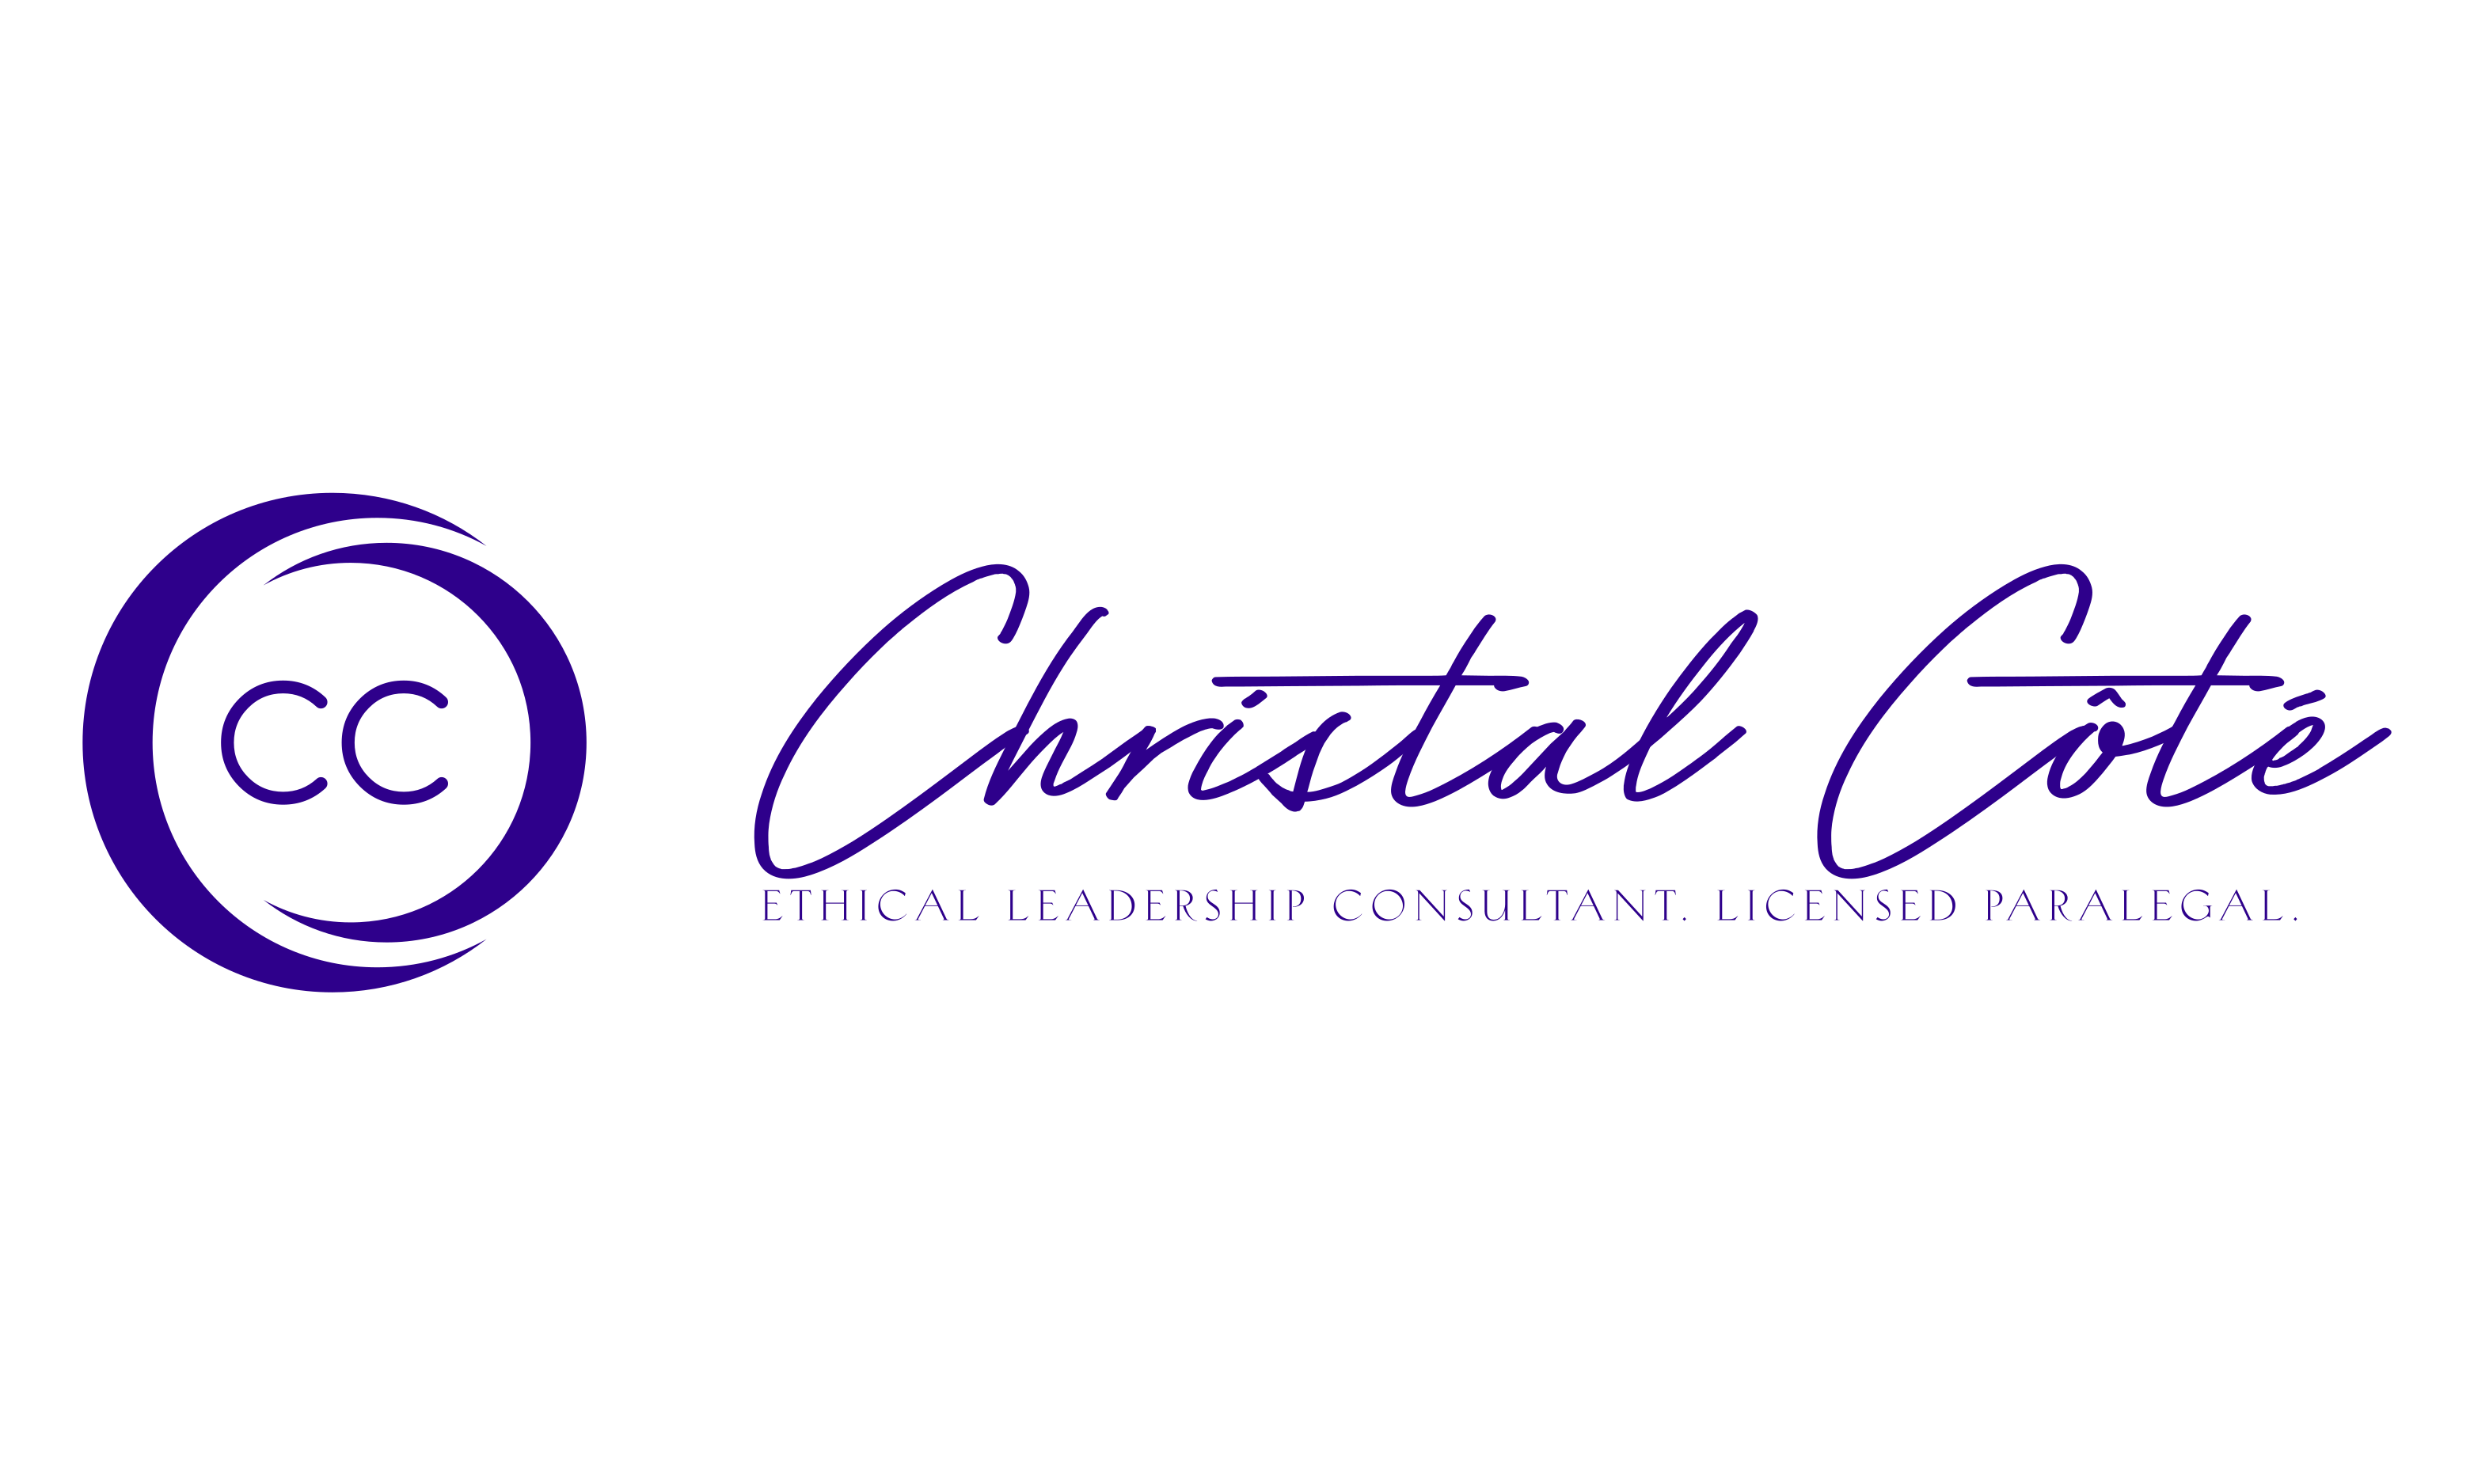 Christal Côté, Licensed Paralegal & Ethical Leadership Consultant